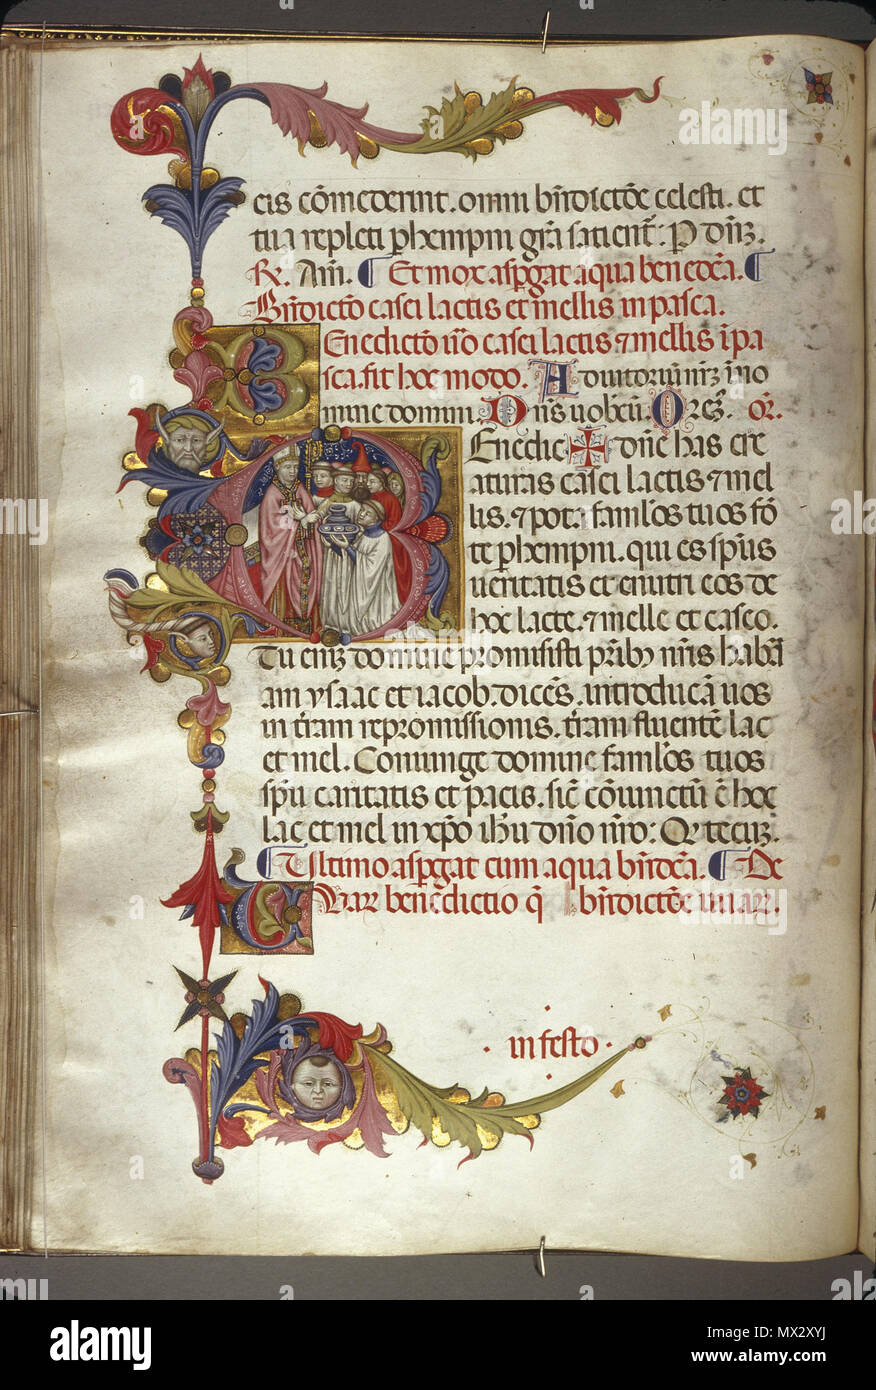 https://c8.alamy.com/comp/MX2XYJ/english-pontifical-ink-tempera-and-gold-leaf-on-parchment-380-x-270-mm-between-circa-1385-and-circa-1399-21-february-2006according-to-exif-data-29-march-2011-original-upload-date-possibly-battista-di-biagio-sanguigni-uploaded-by-st-brigit-at-enwikipedia-286-houghtonmstyp0001-MX2XYJ.jpg